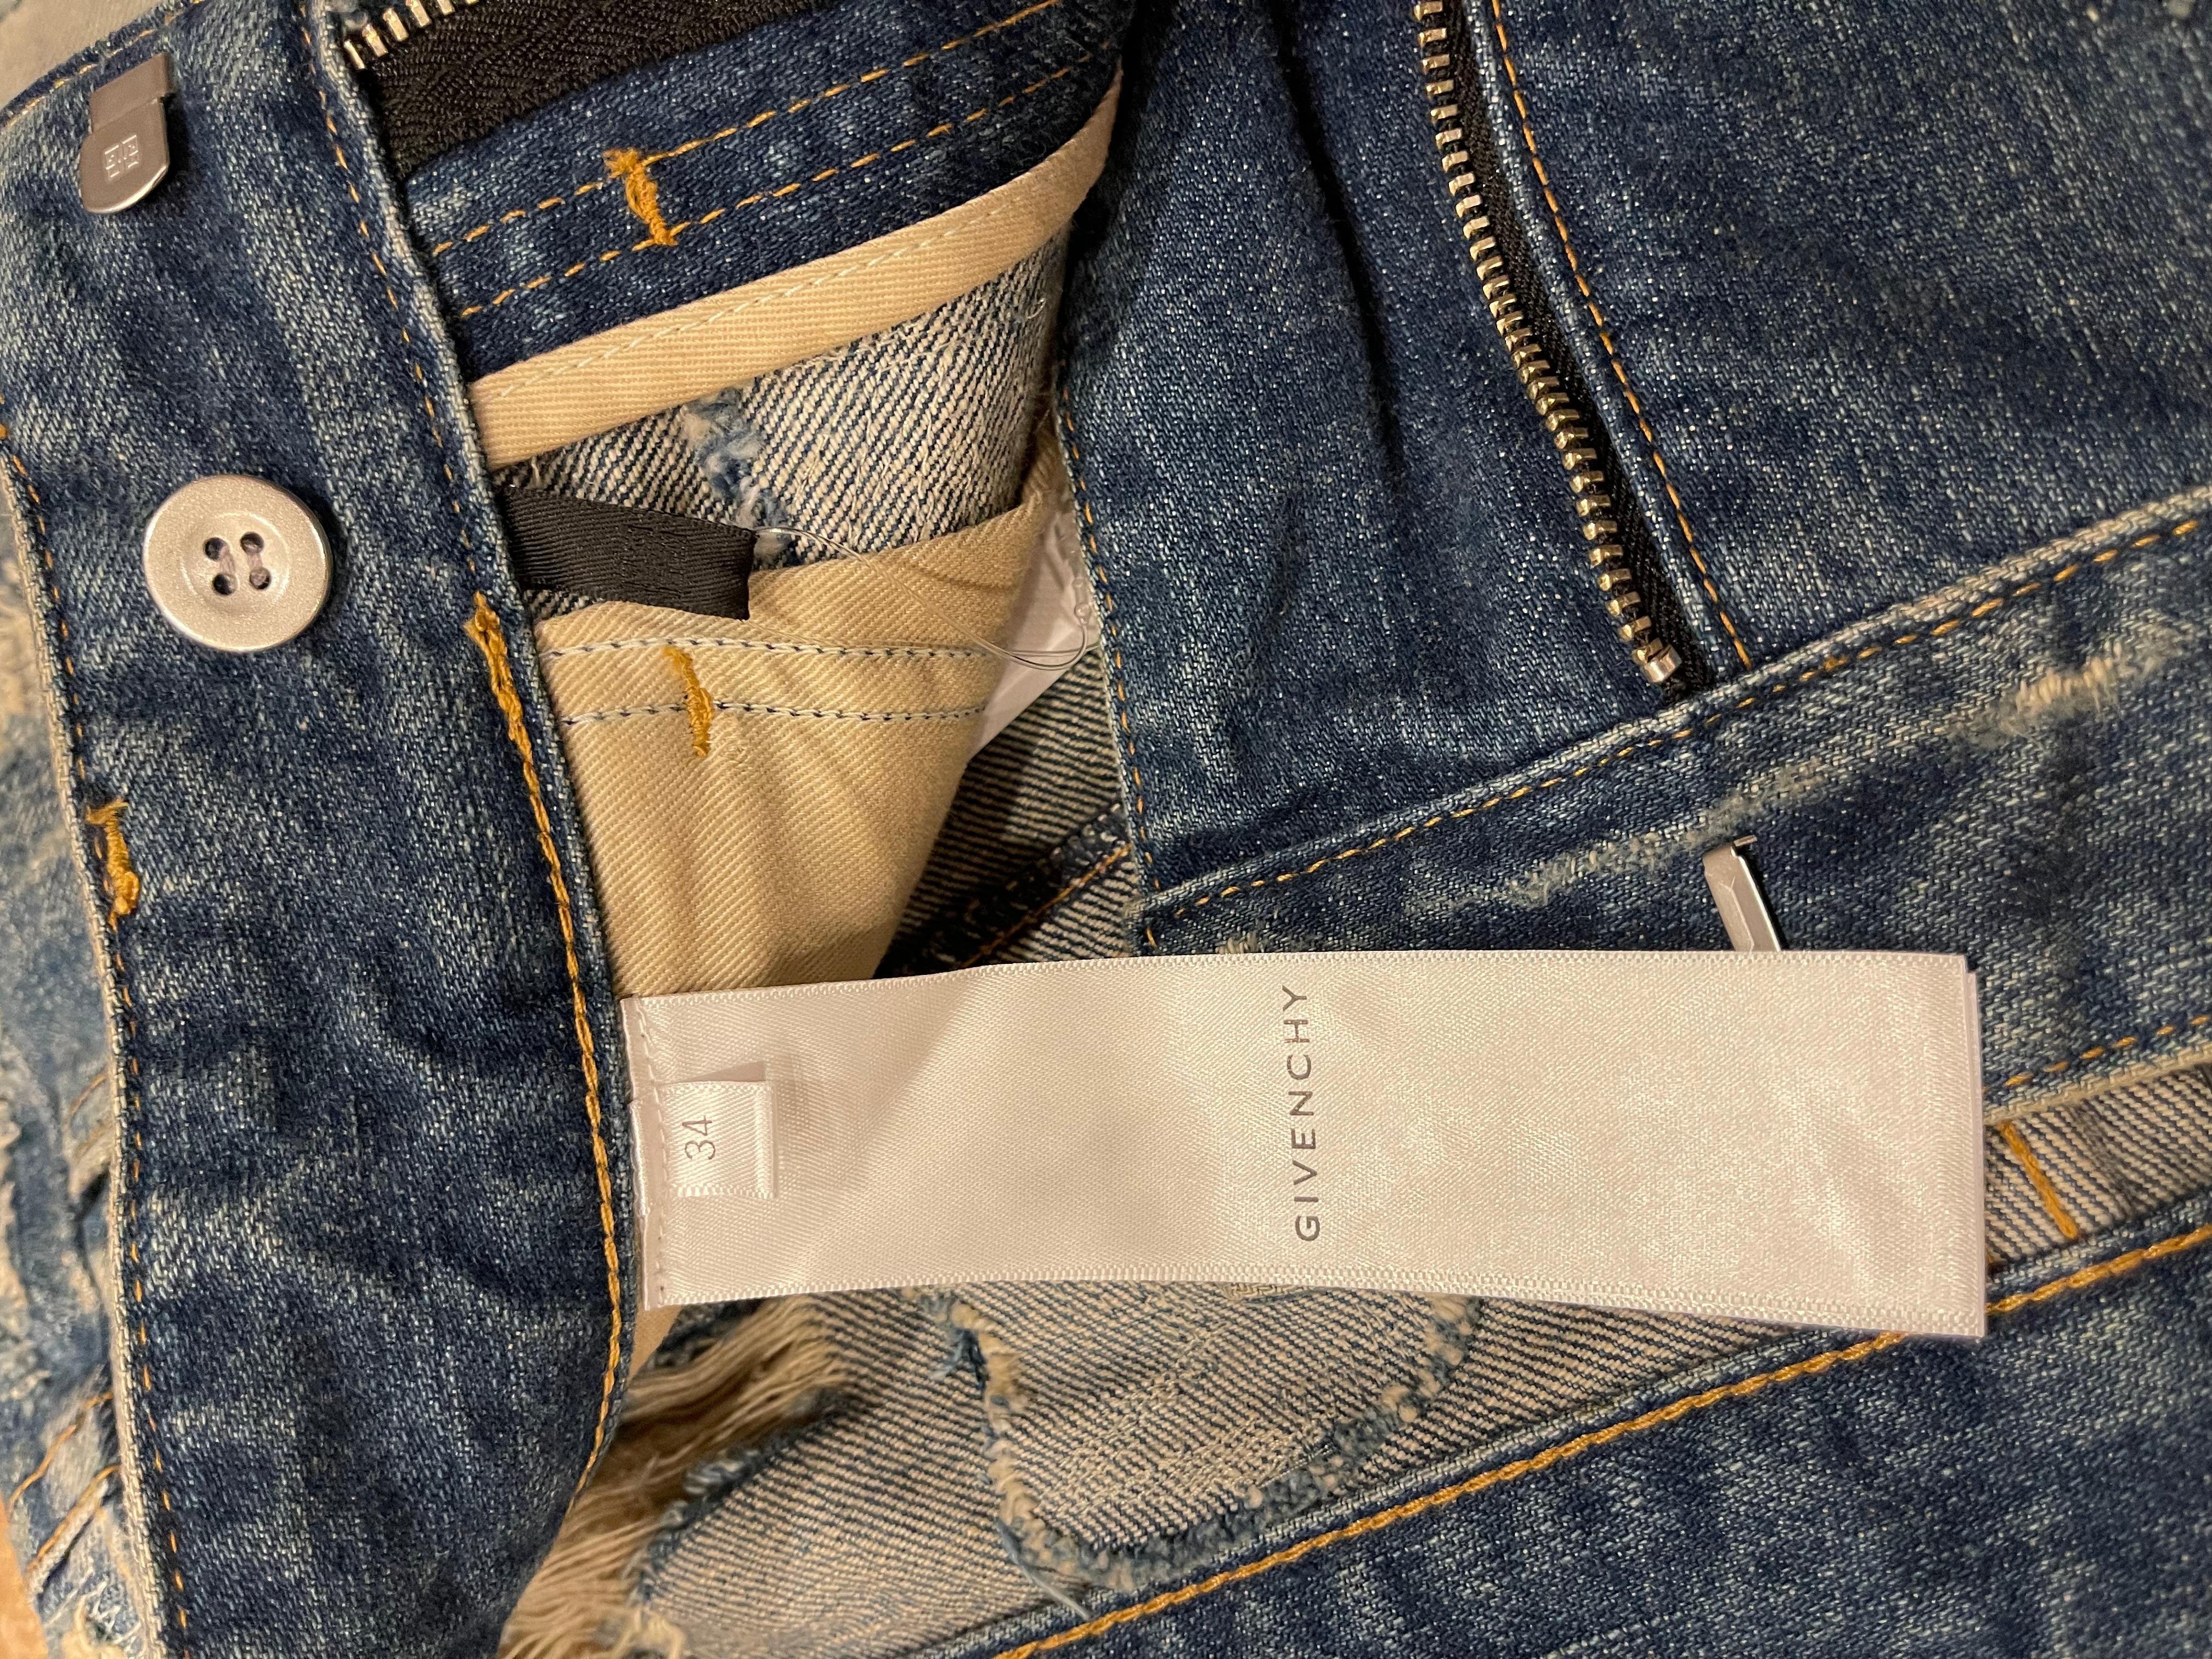 Givenchy Matthew Williams Jeans In Destroyed Denim Moleskin size 34 In Excellent Condition For Sale In Bear, DE